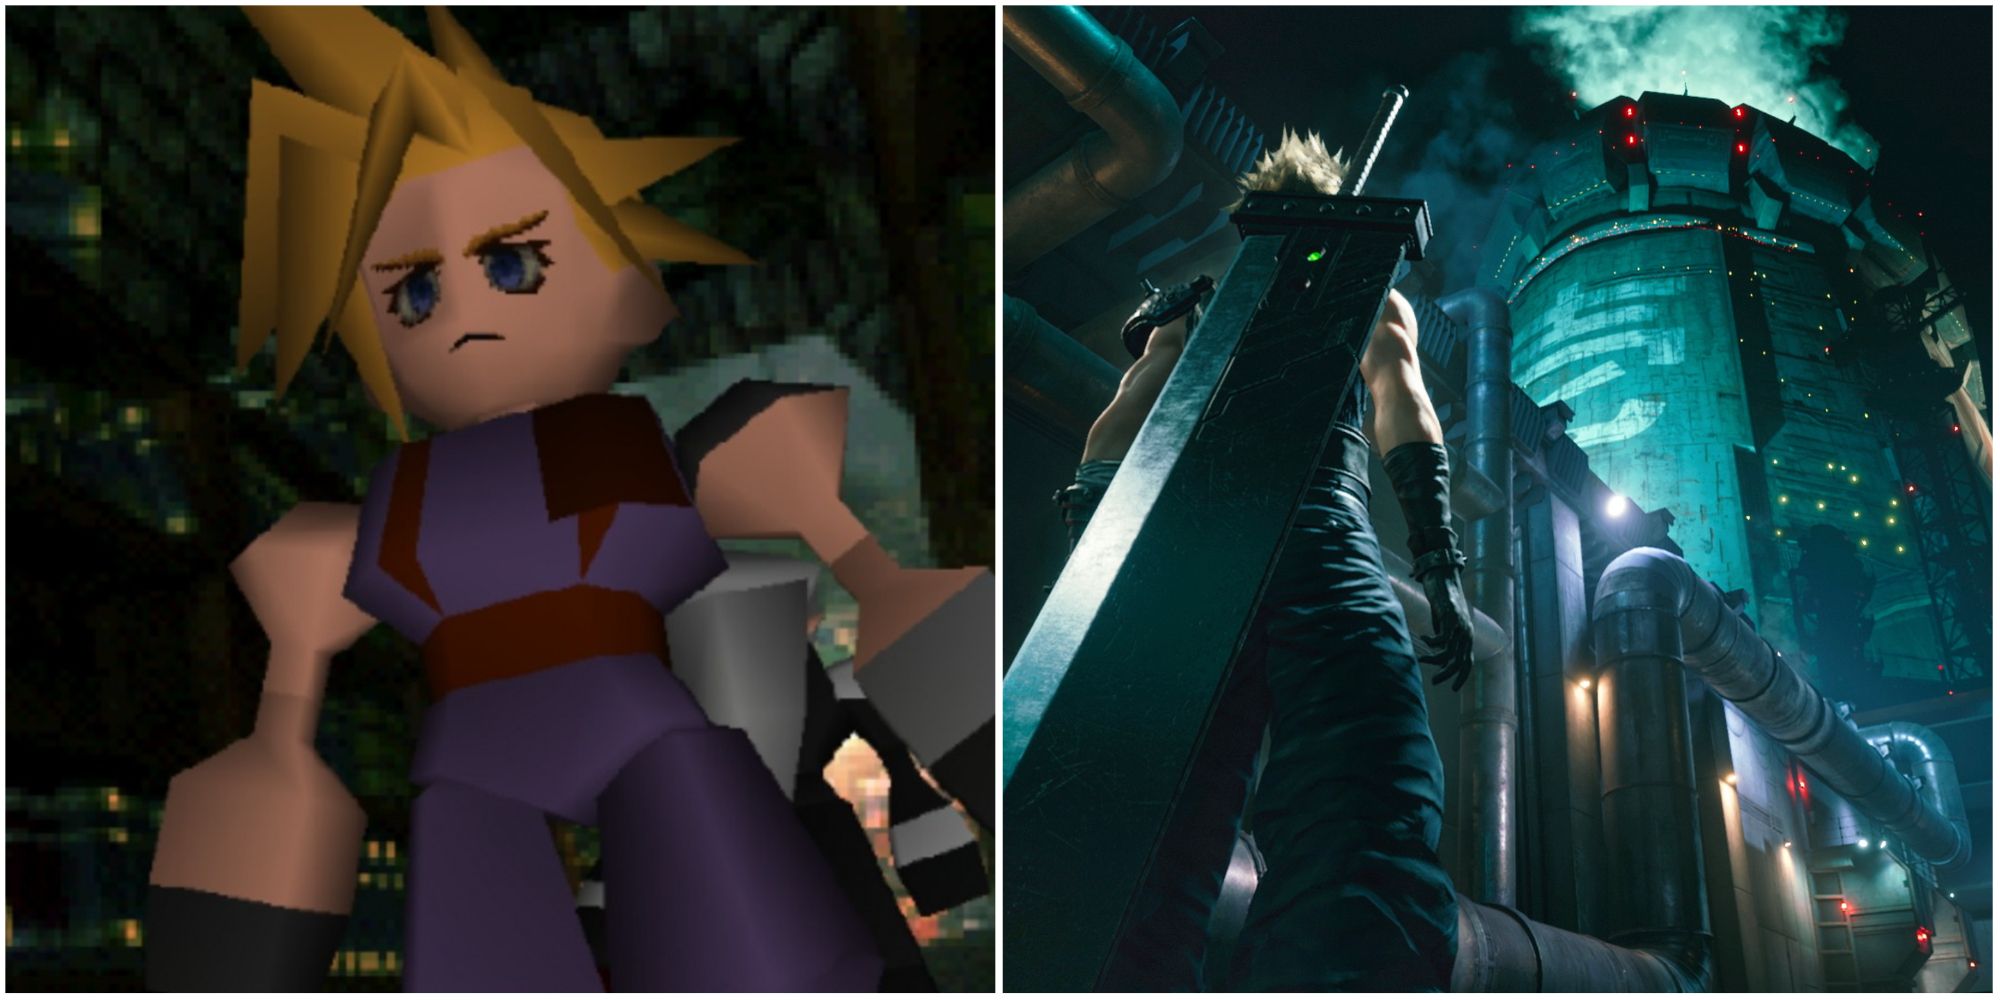 Cloud in Final Fantasy 7, the Original and the Remake